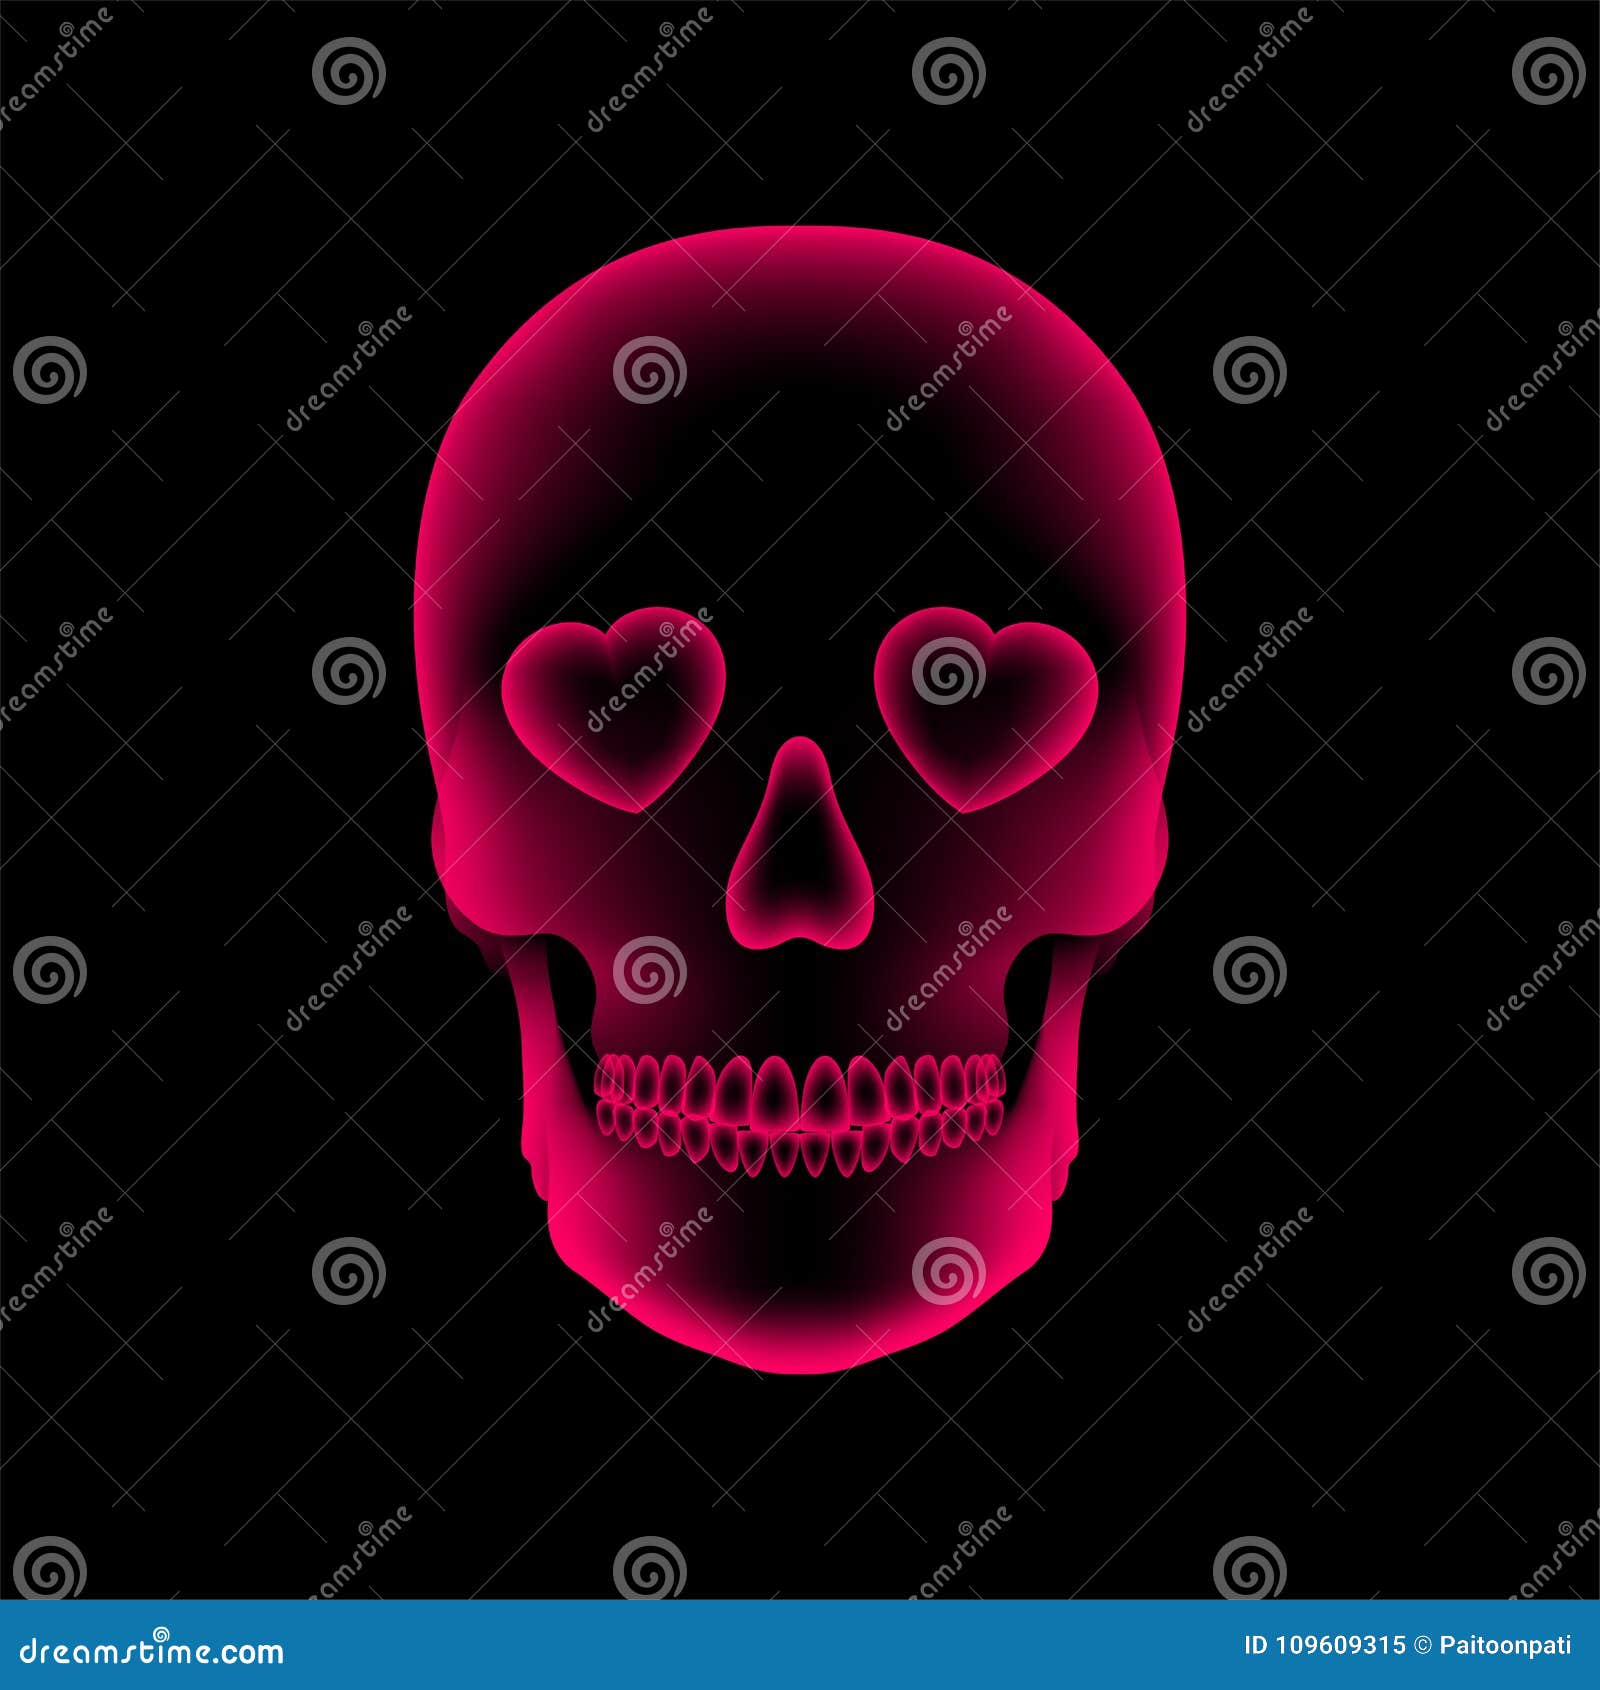 Download Skull X-ray With Heart Eye Symbol, Love Concept Design, Front View Illustration Stock Vector ...